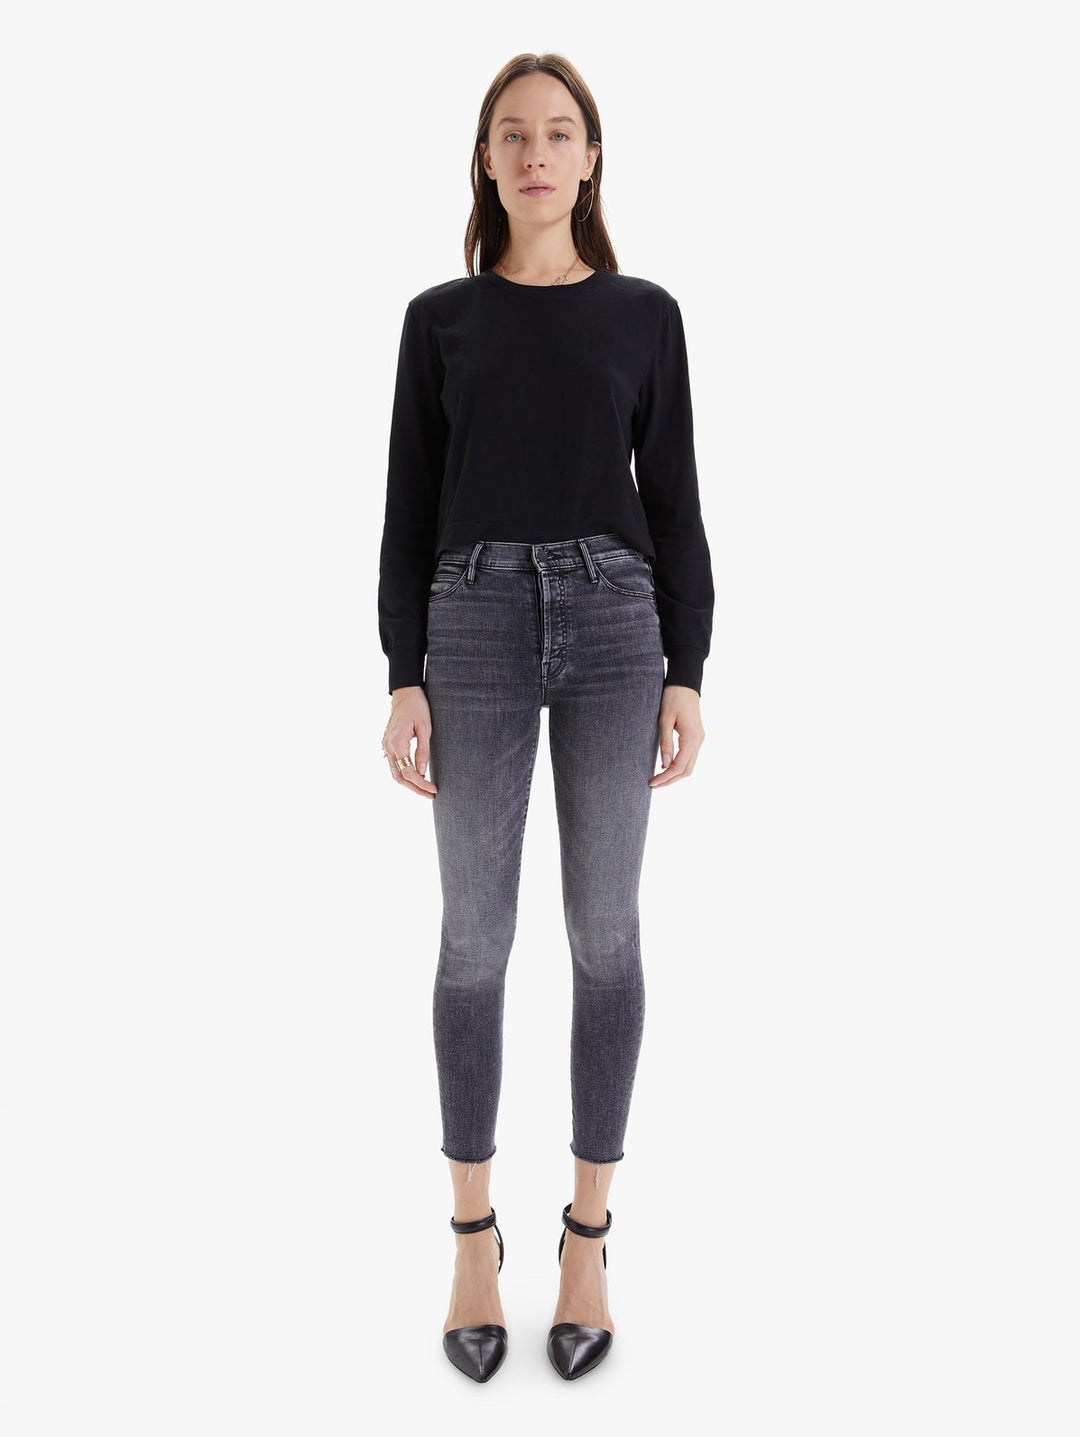 Mother Denim - The Stunner Ankle Fray Skinny Jean in Friday the 13th